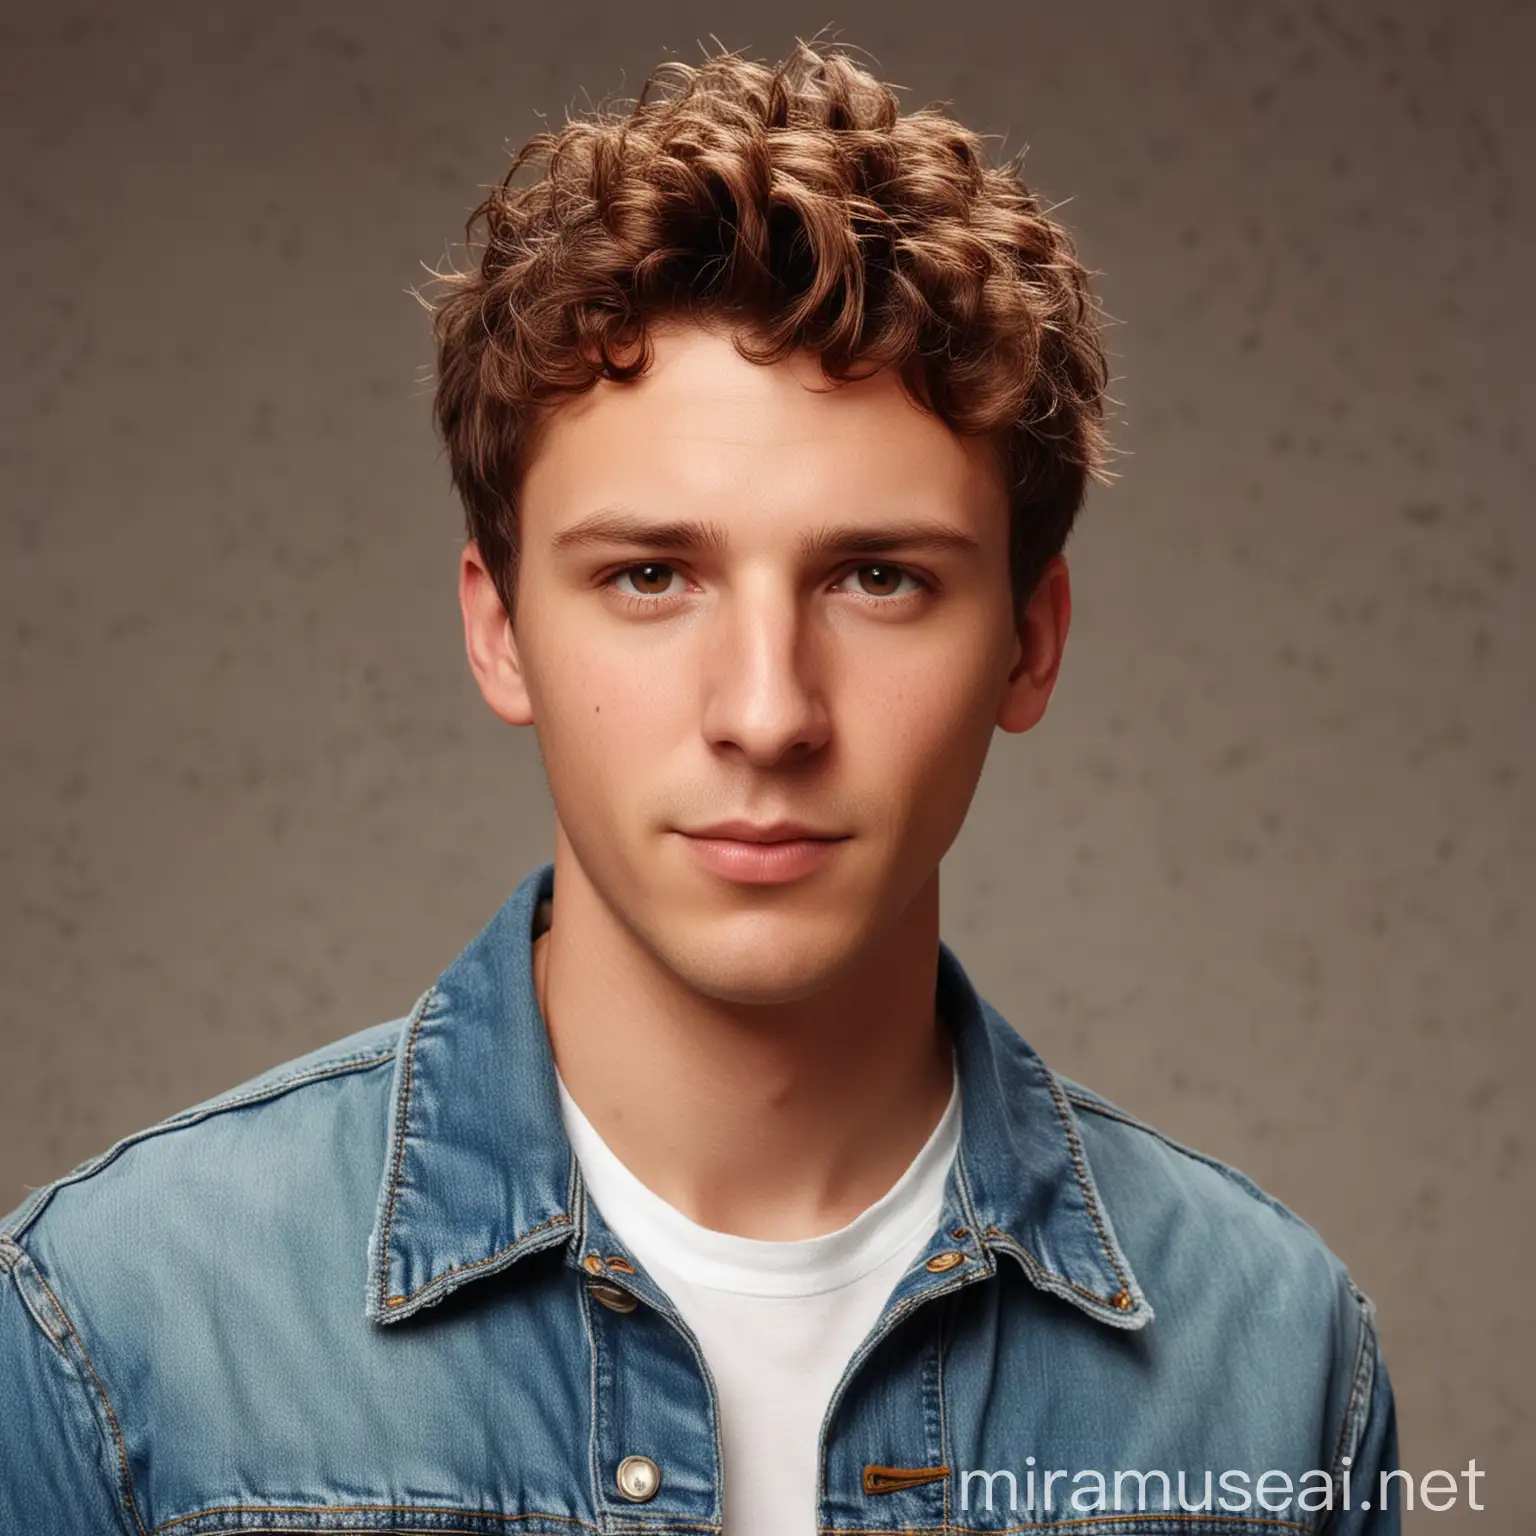 Young Man in Denim Jacket with Carelessly Trimmed Chestnut Hair